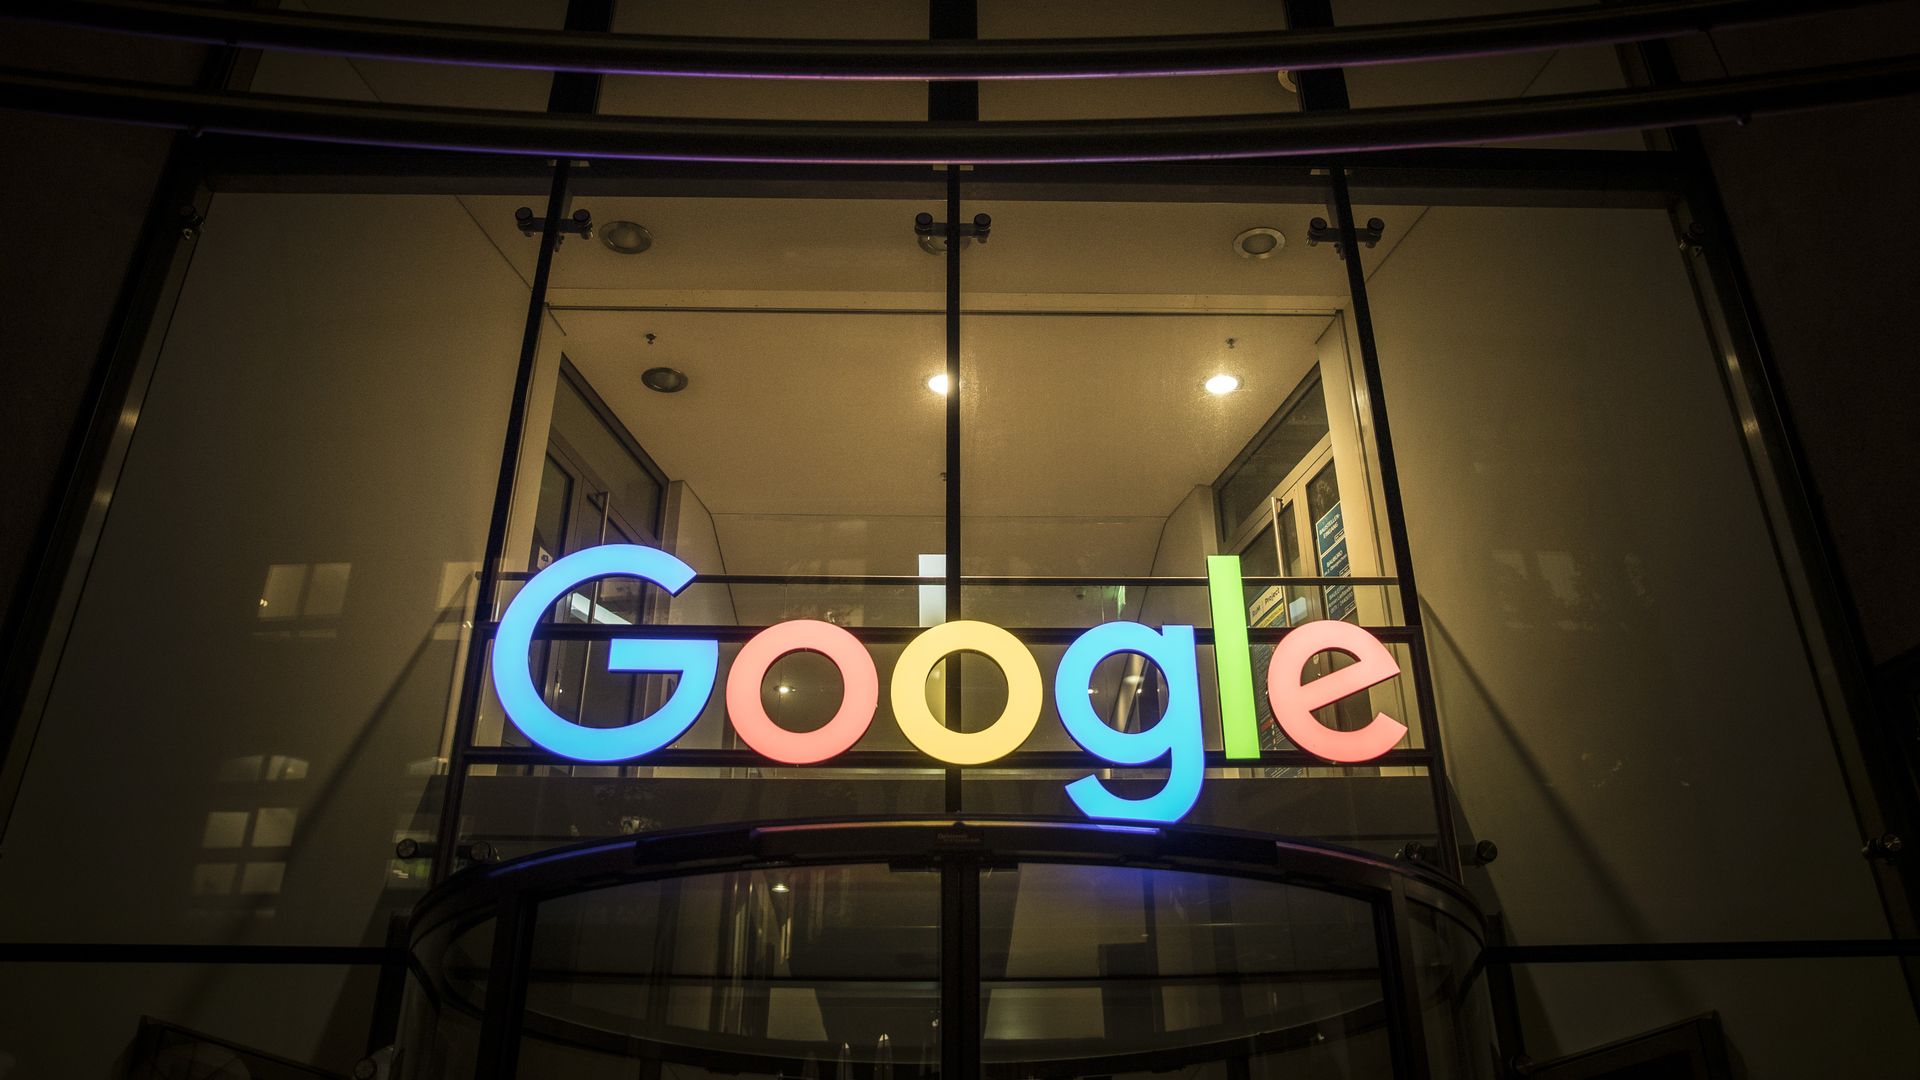 A Google sign lit up at night outside of an office